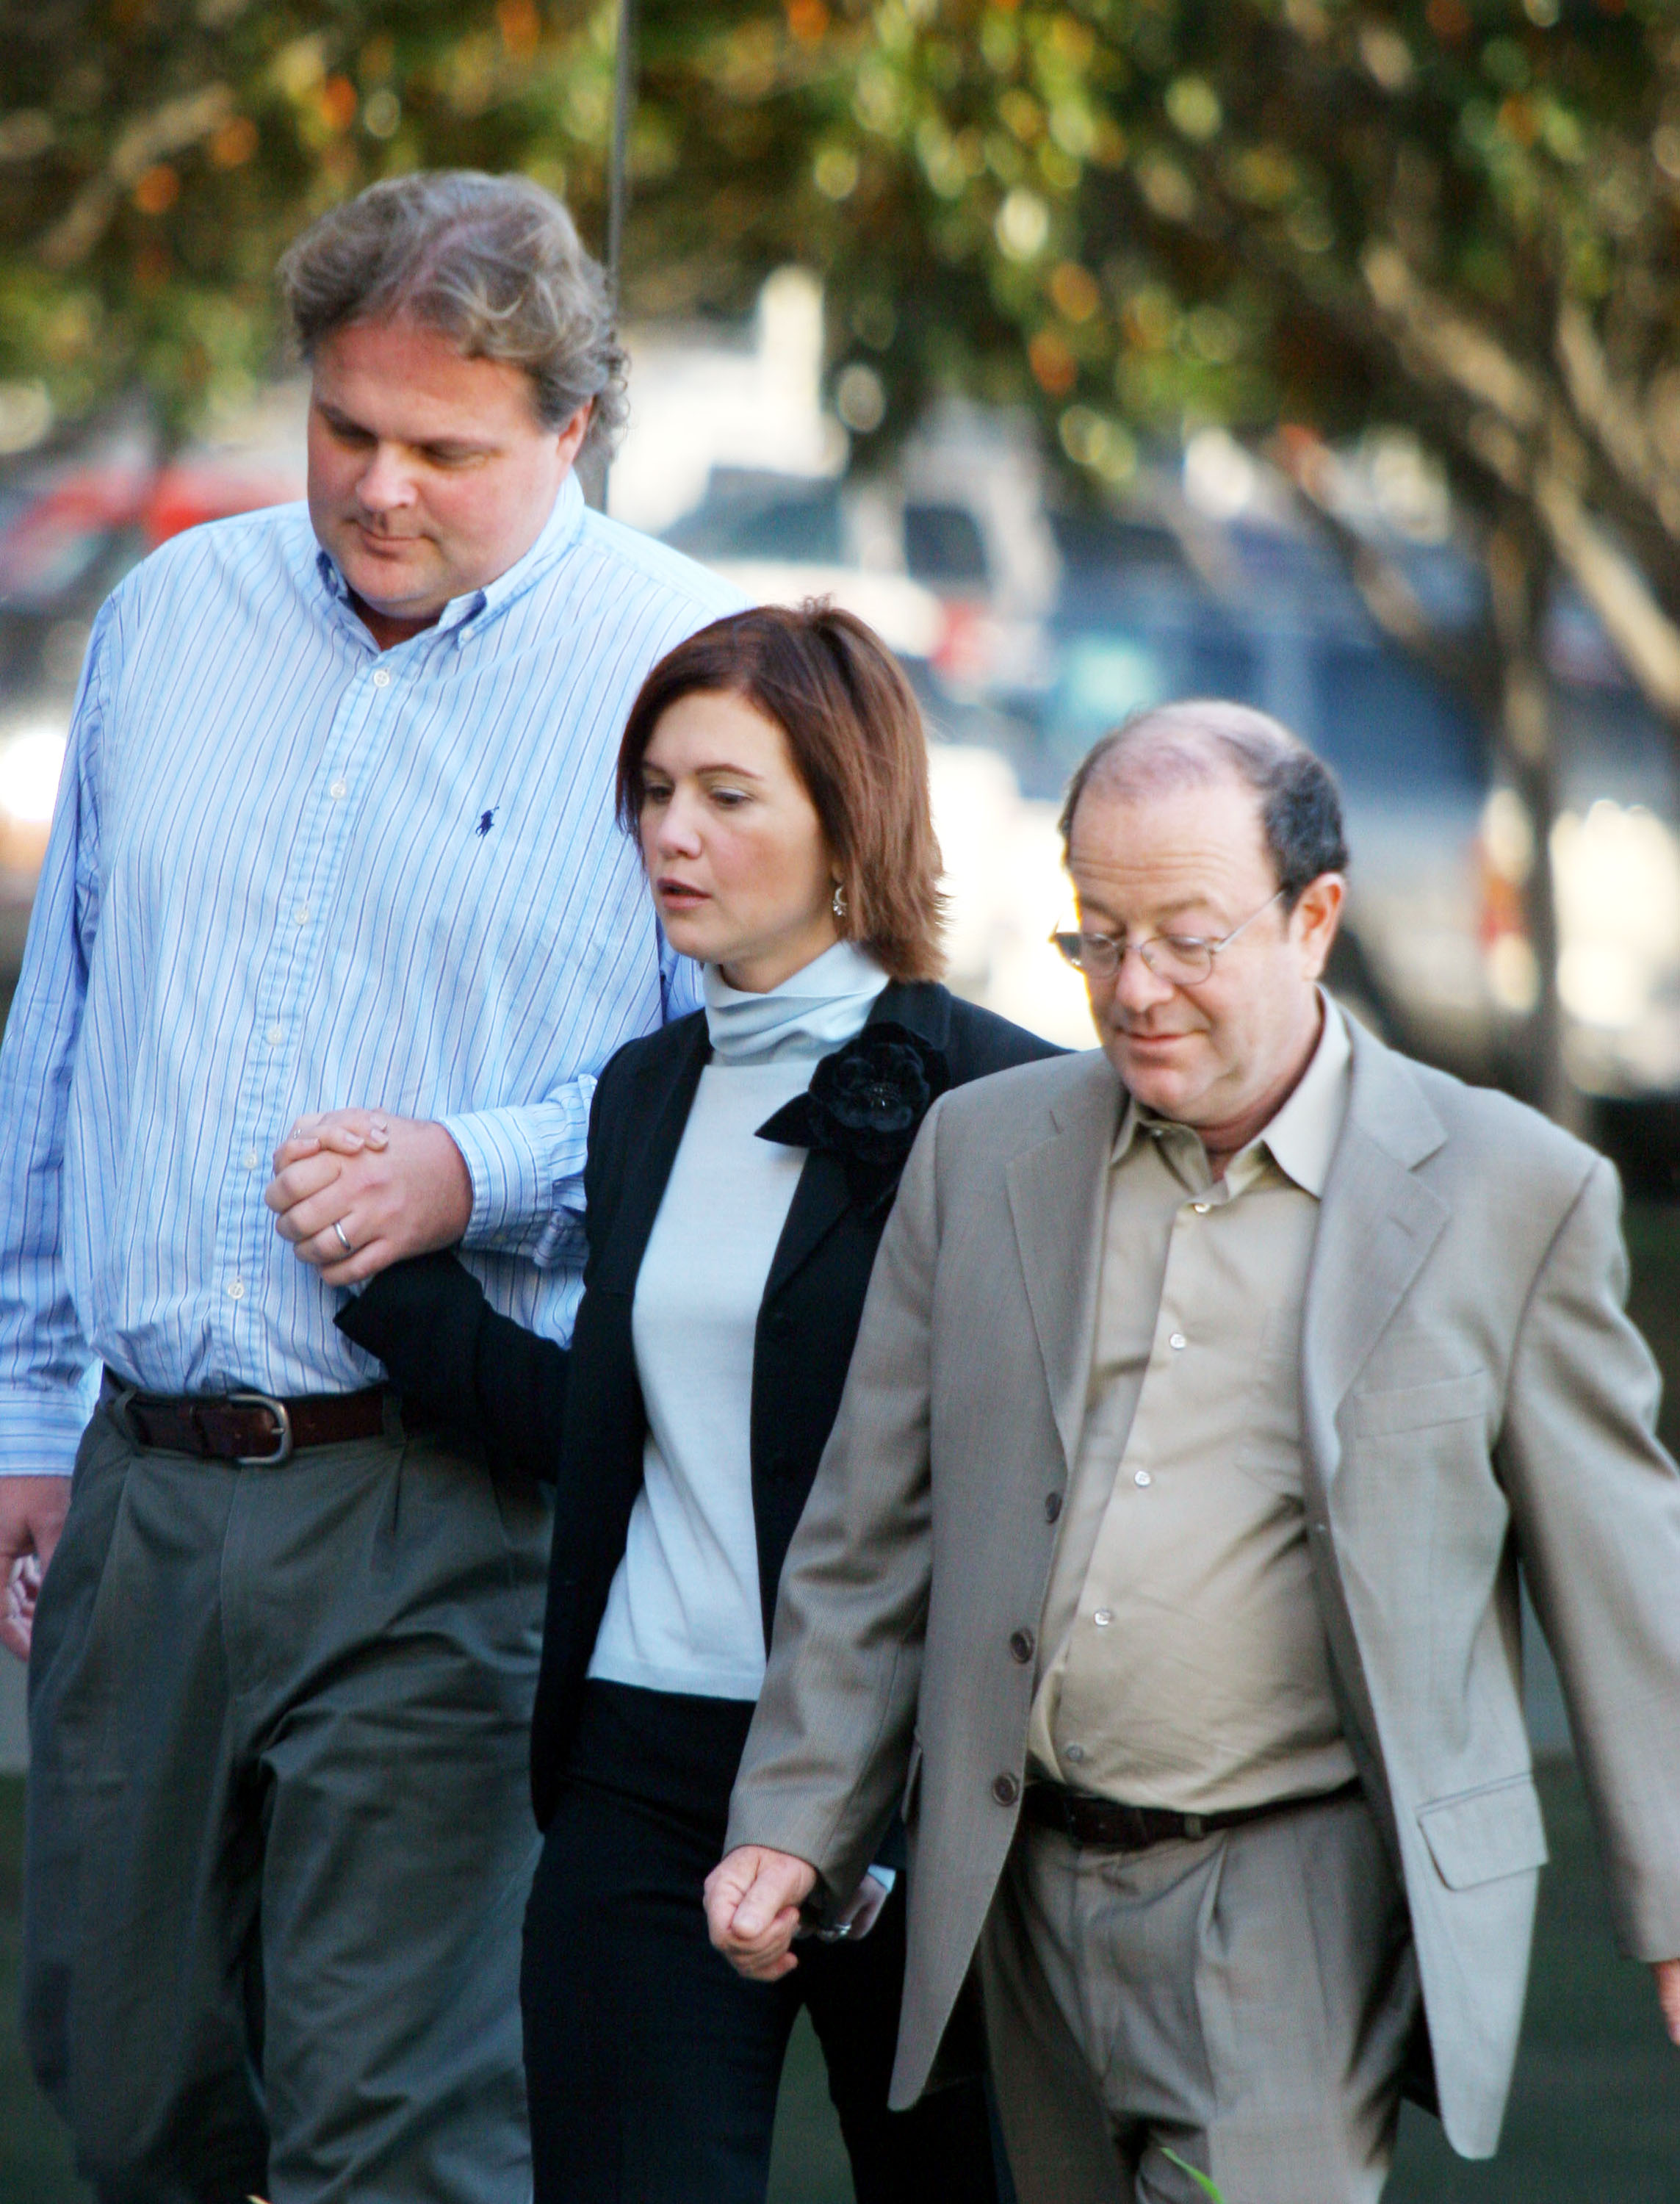 Tracey Gold and her husband Roby Marshall arriving at the Ventura Superior Courthouse on November 19, 2004, in Ventura, California. | Source: Getty Images